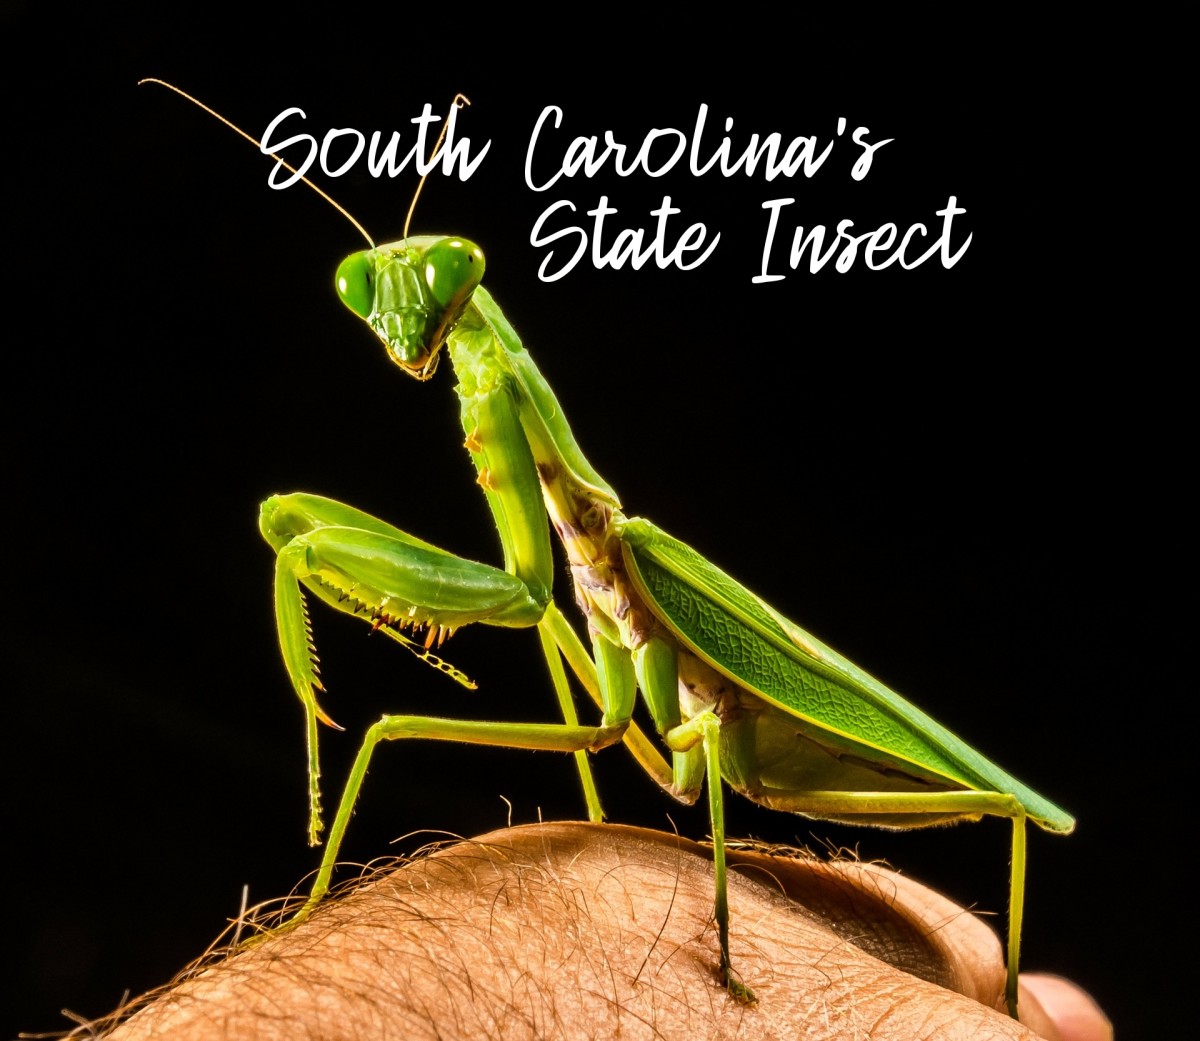 South Carolina's state insect